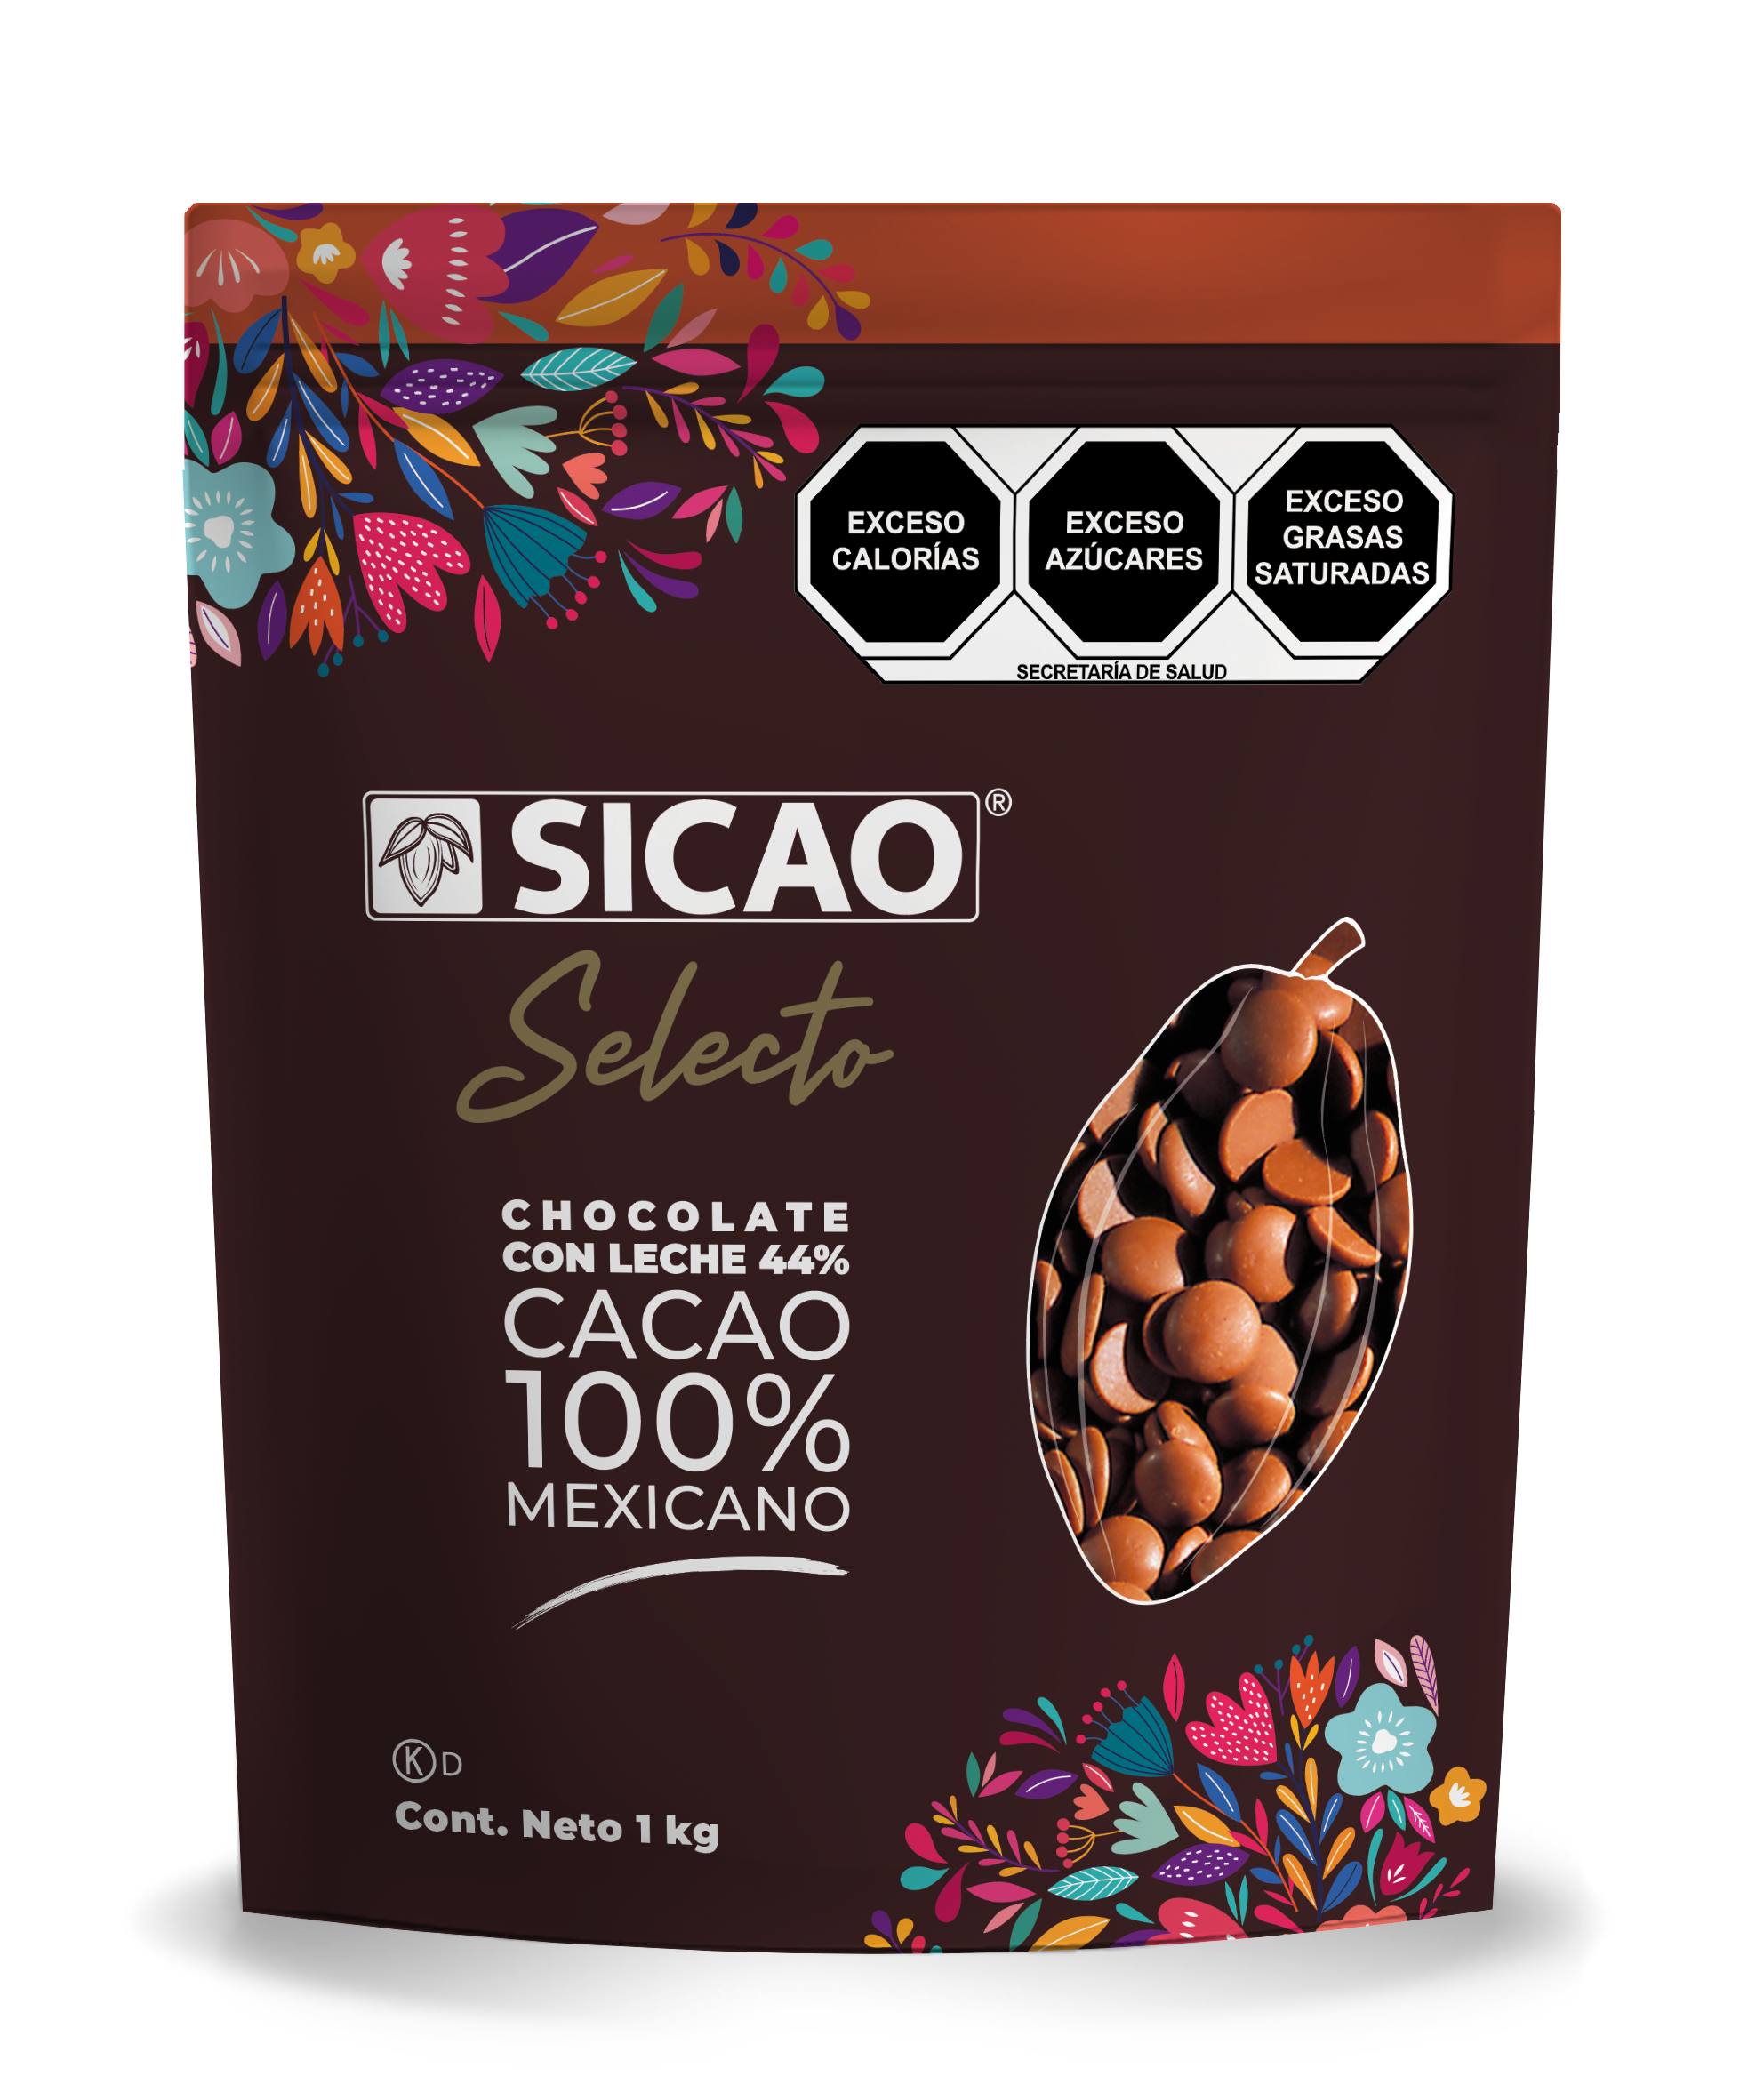 Chocolate - Chocolate con leche - 44% Cacao - Cacao mexicano - Wafer - 1 kg (1)